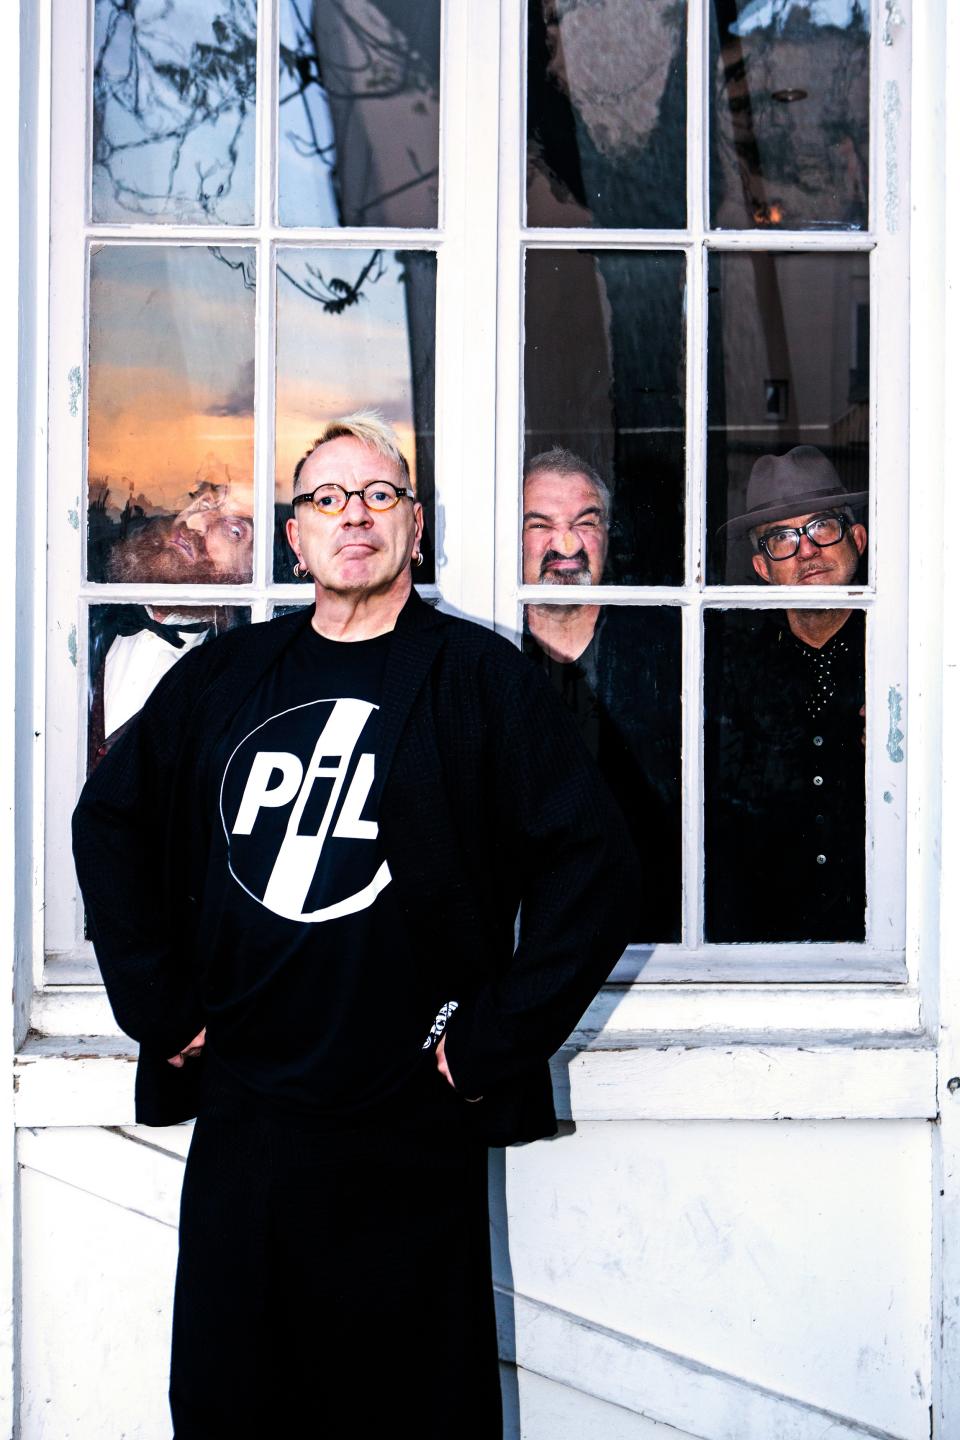 Public Image Ltd.'s most stable lineup to date: Lu Edmonds, John Lydon, Scott Firth, and Bruce Smith. (Andres Poveda Photography)